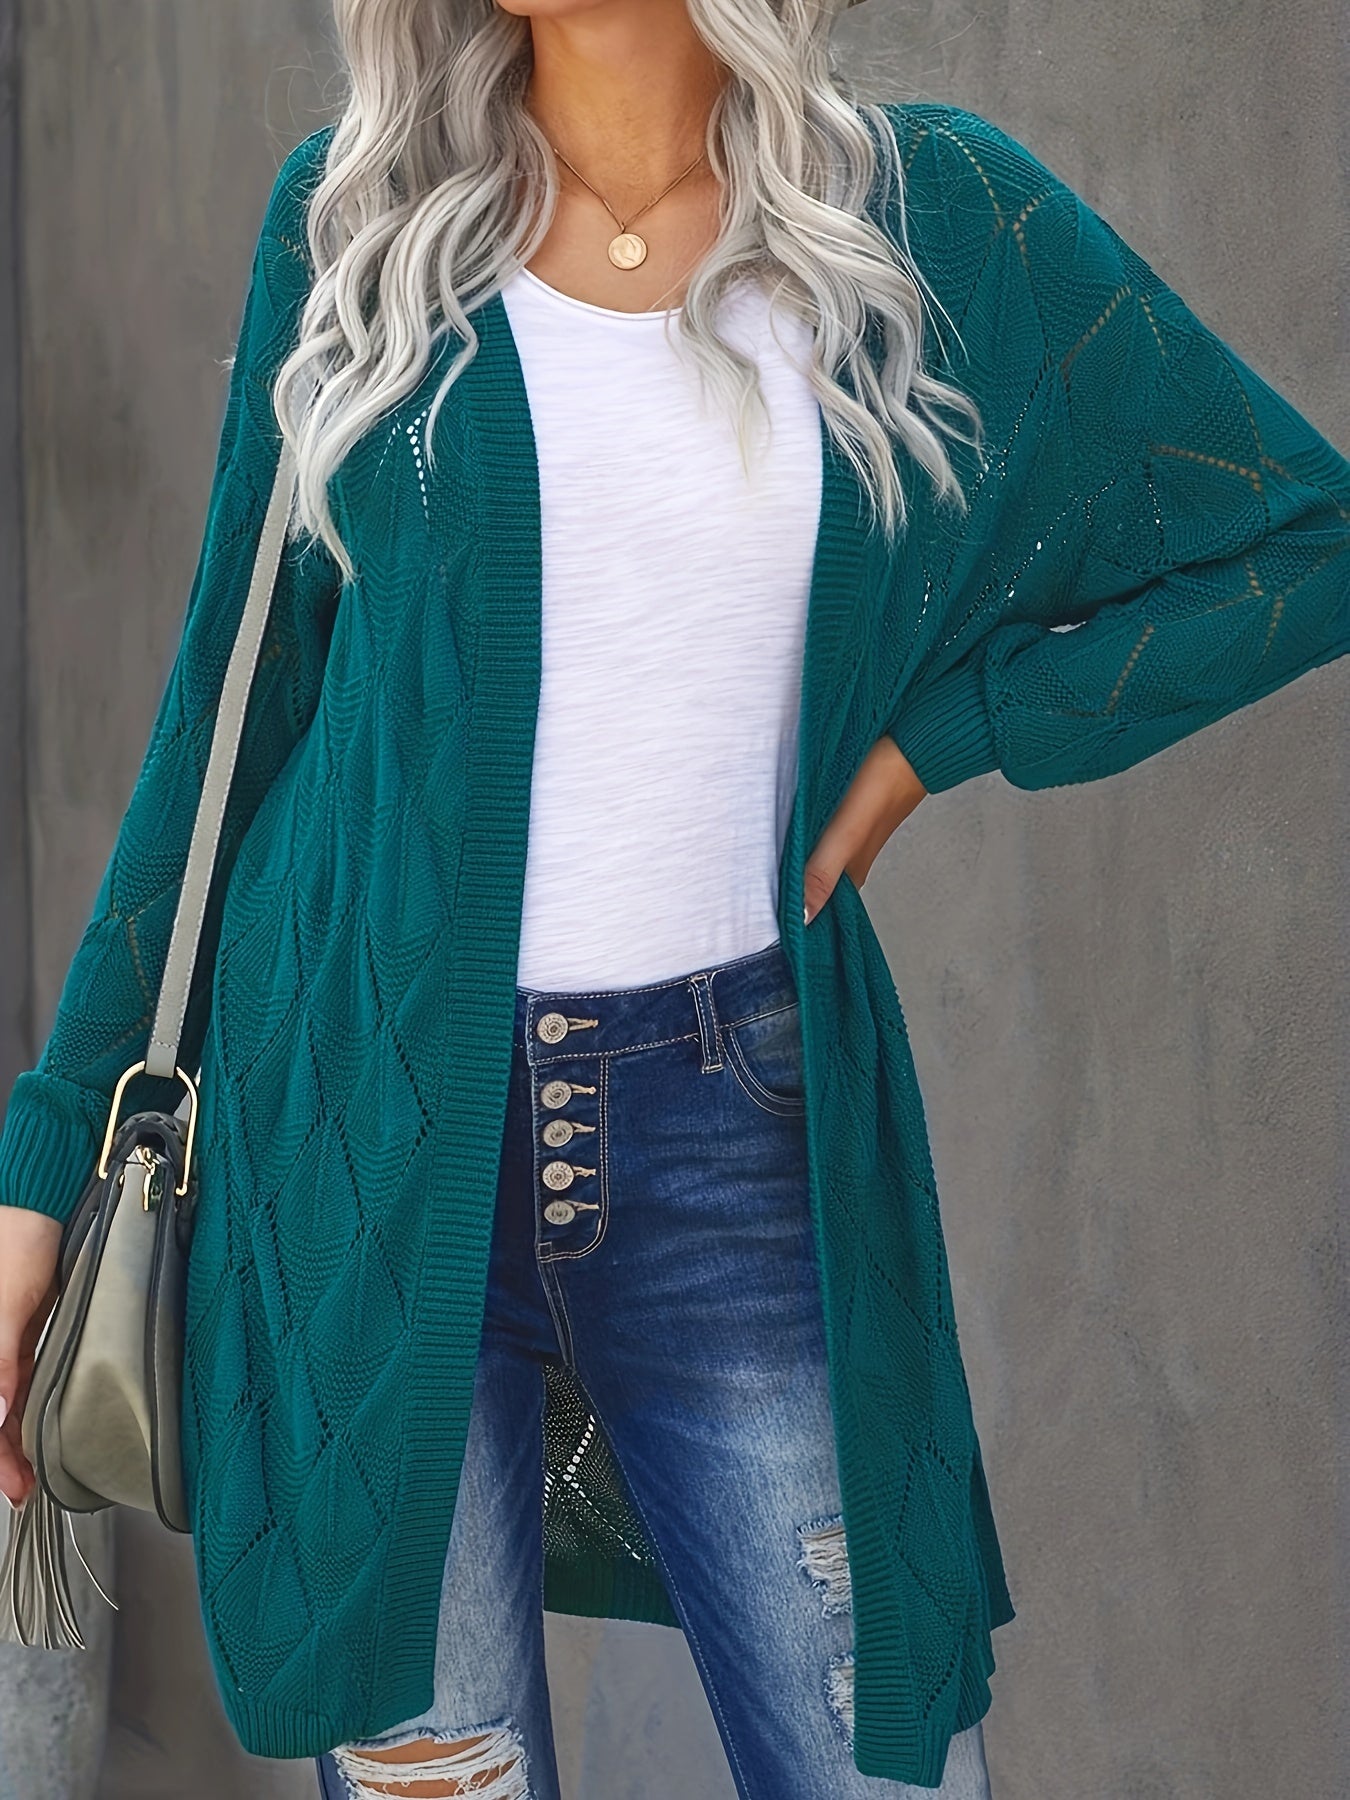 Plus Size Casual Cardigan, Women's Plus Solid Eyelet Embroidered Long Sleeve Open Front Cardigan